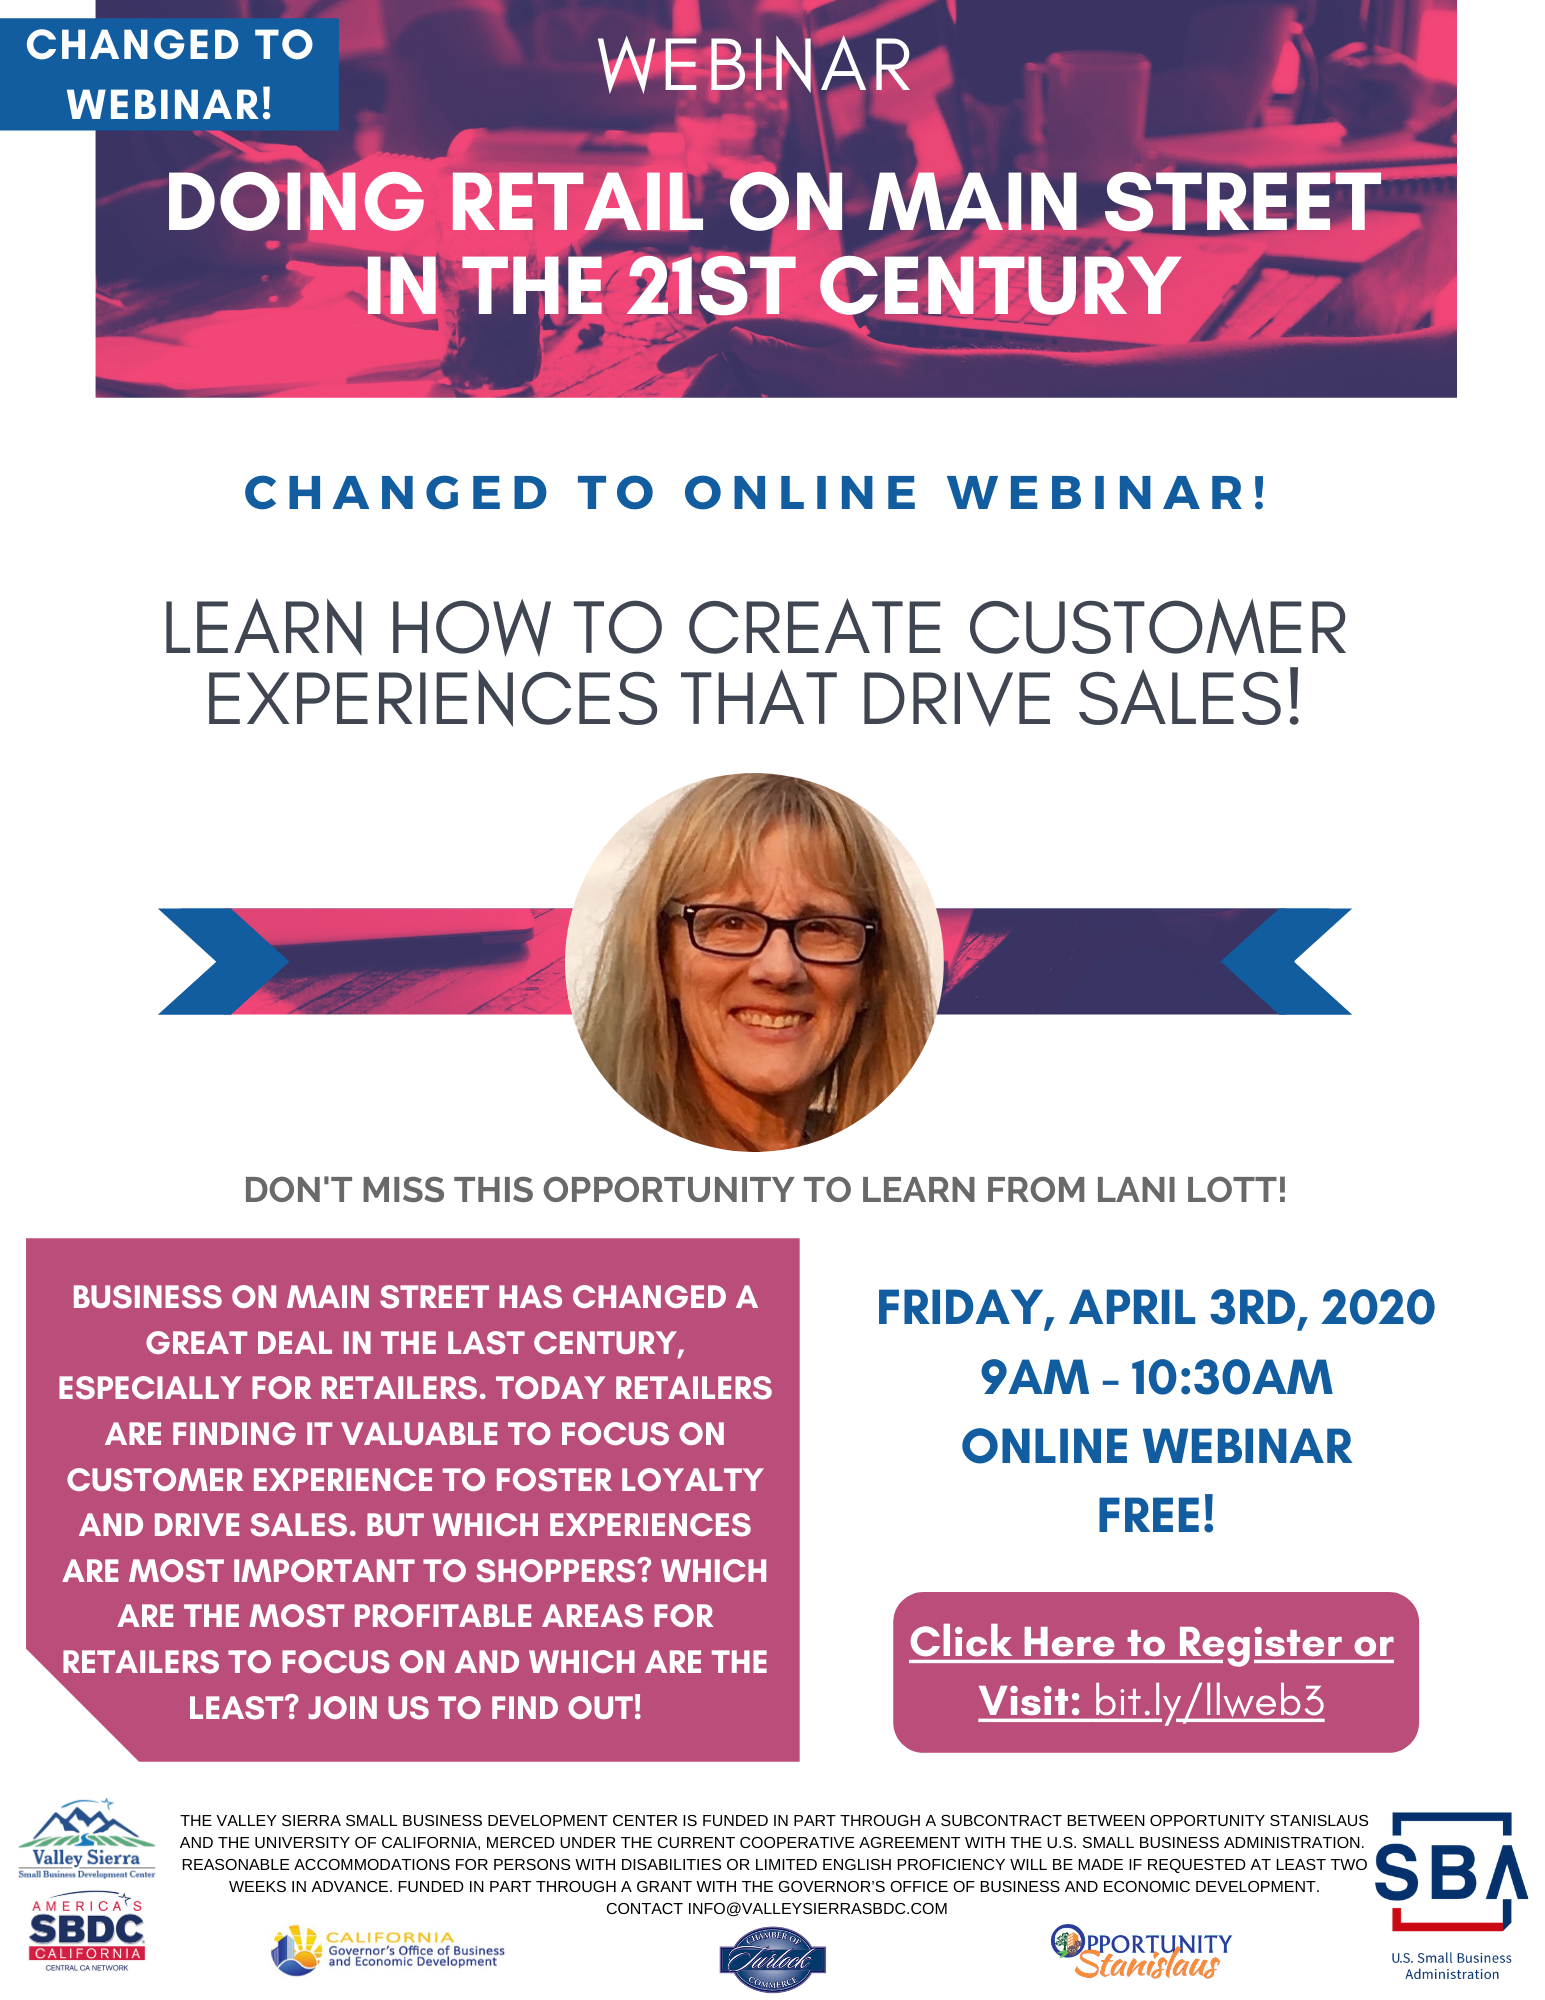 Event Flyer, Changed to webinar: Turlock: Doing Retail on Main Street in the 21st Century. 4/3/20, 9am-10:30am. Turlock Chamber of Commerce, 115 S Golden State Blvd. Turlock, CA. FREE.